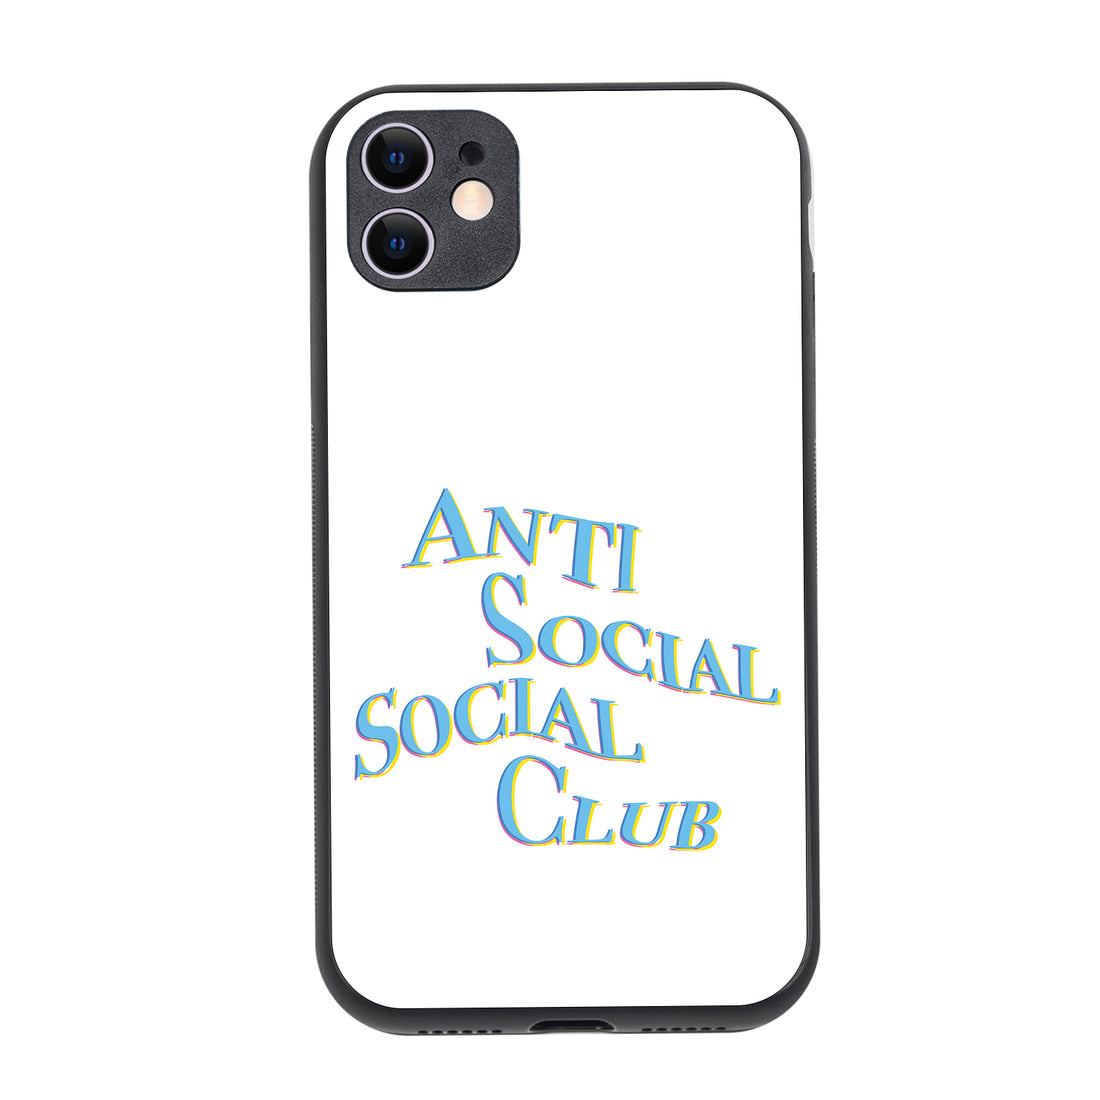 Social Club Motivational Quotes iPhone 11 Case